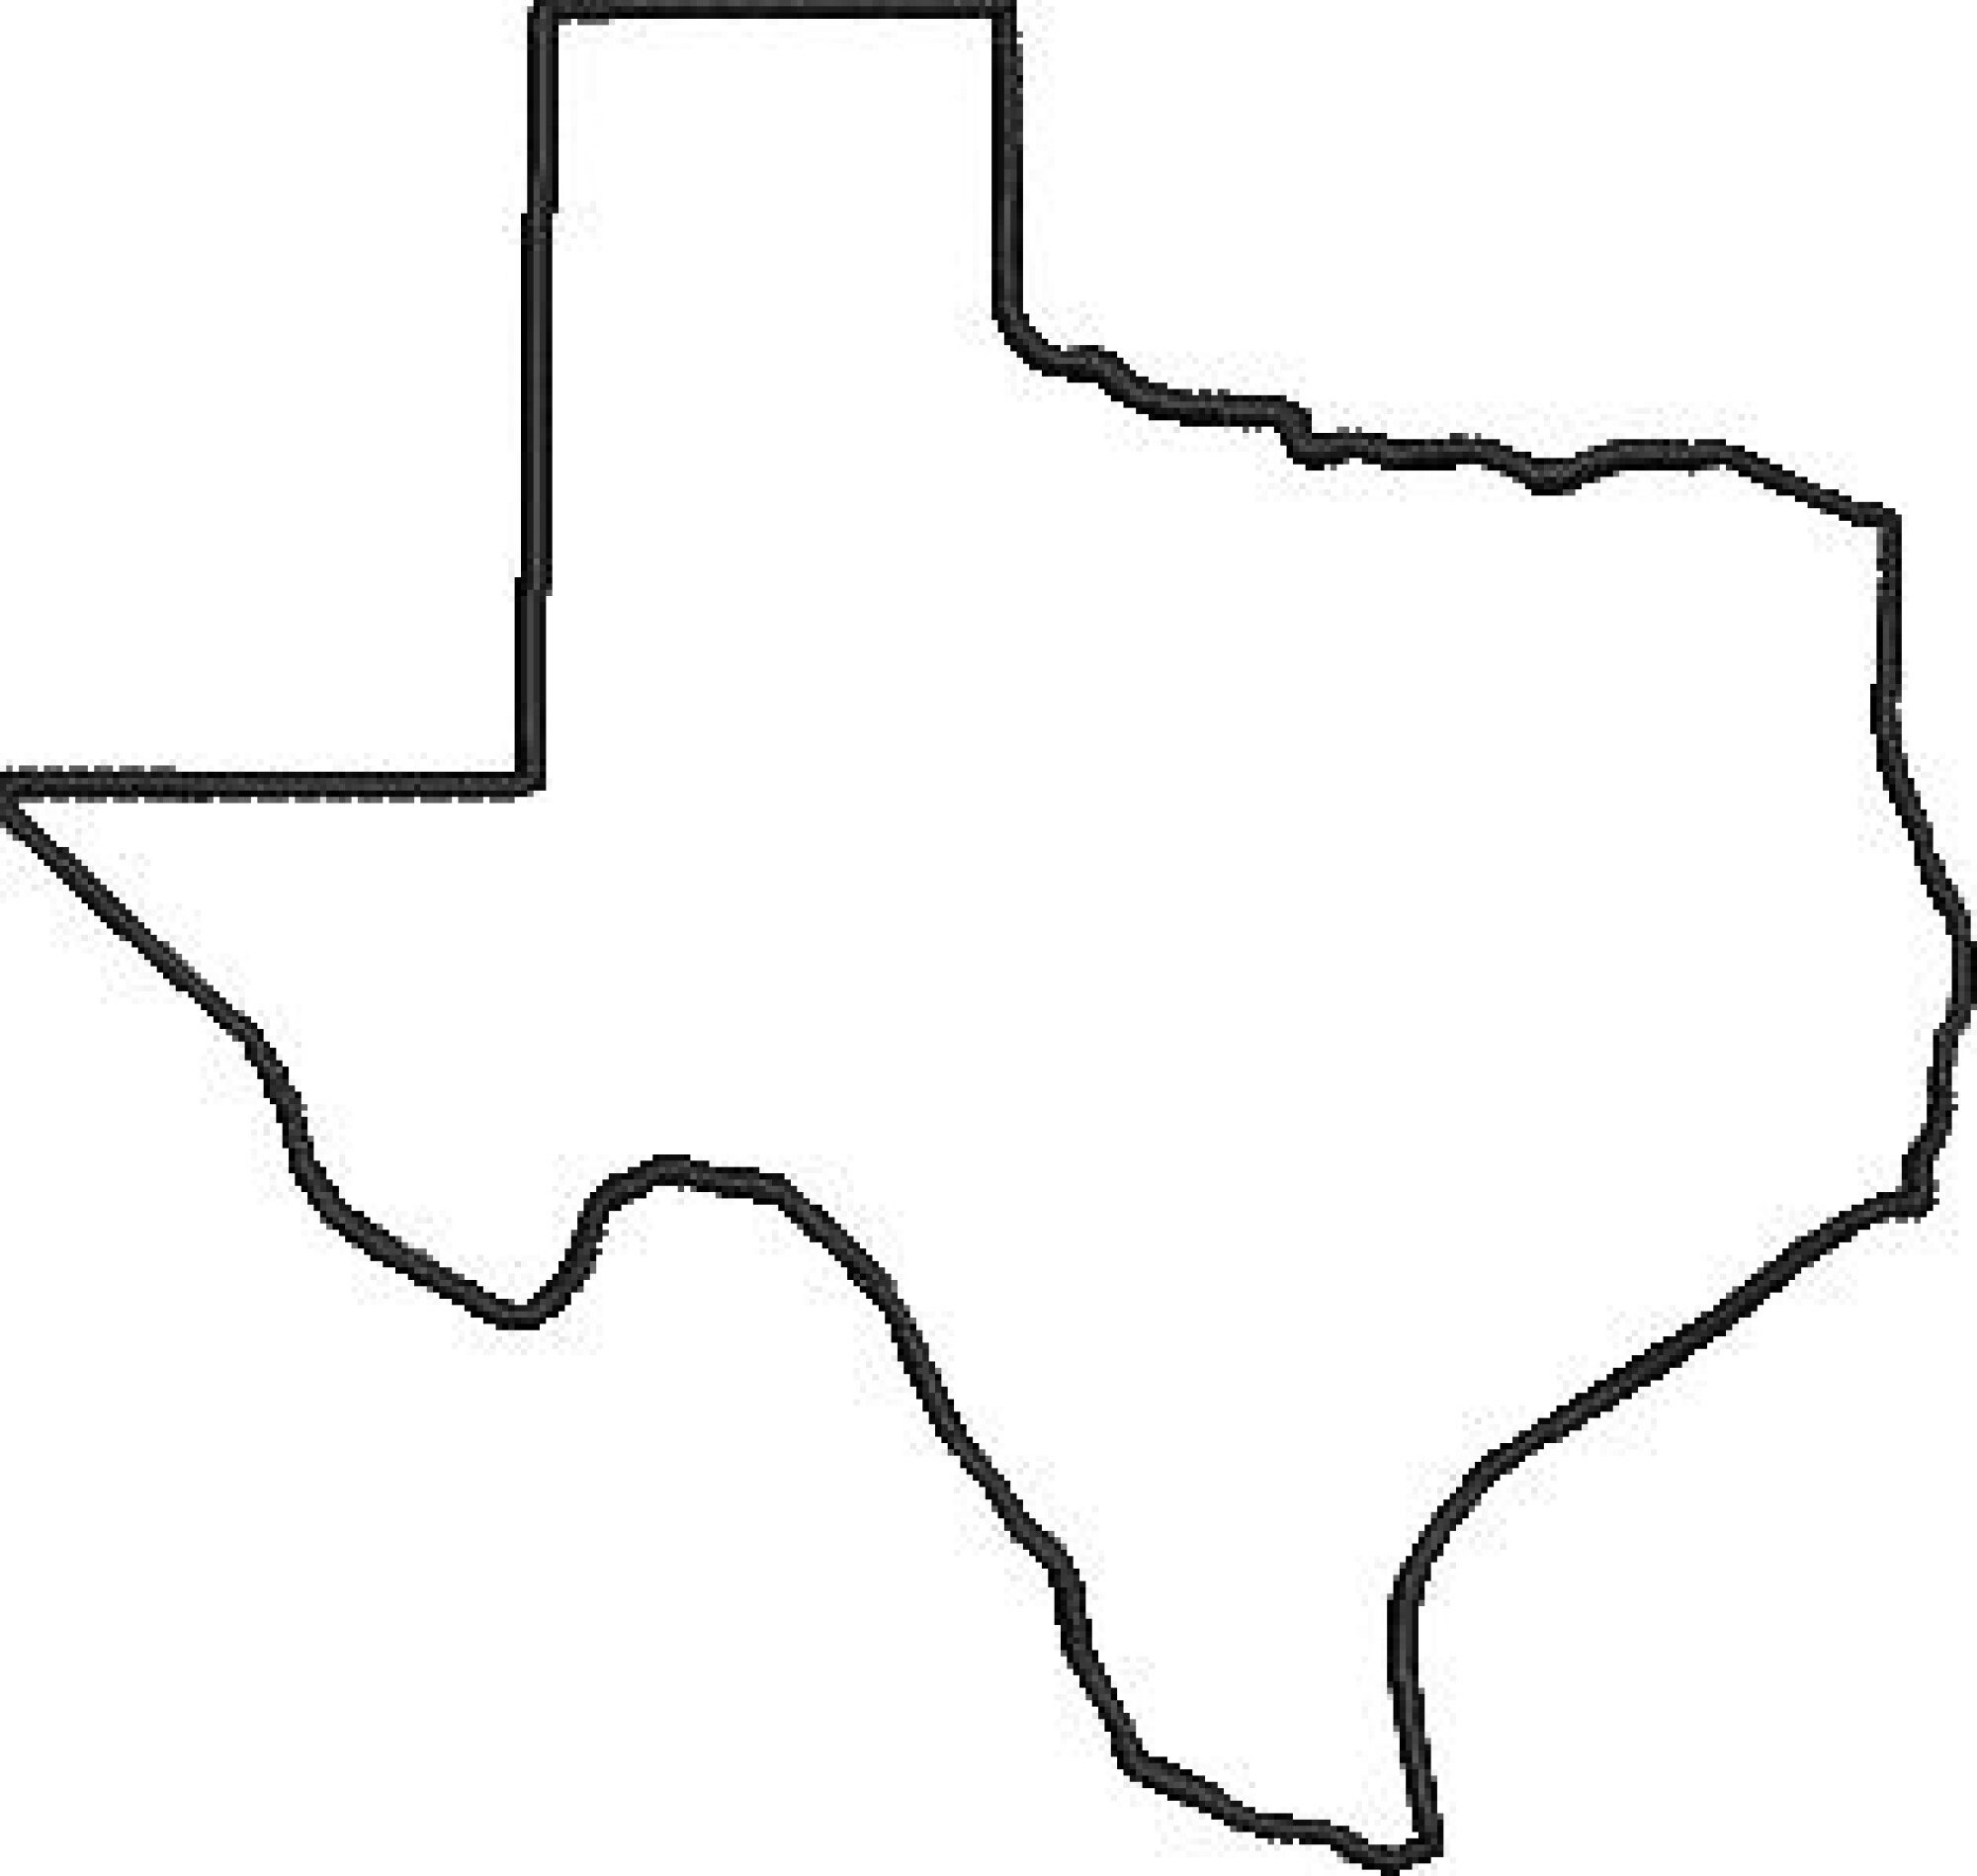 Looking for some possible coverup ideas for this TX flag No longer proud  of the state and I dont want it anymore lol  rTattooDesigns